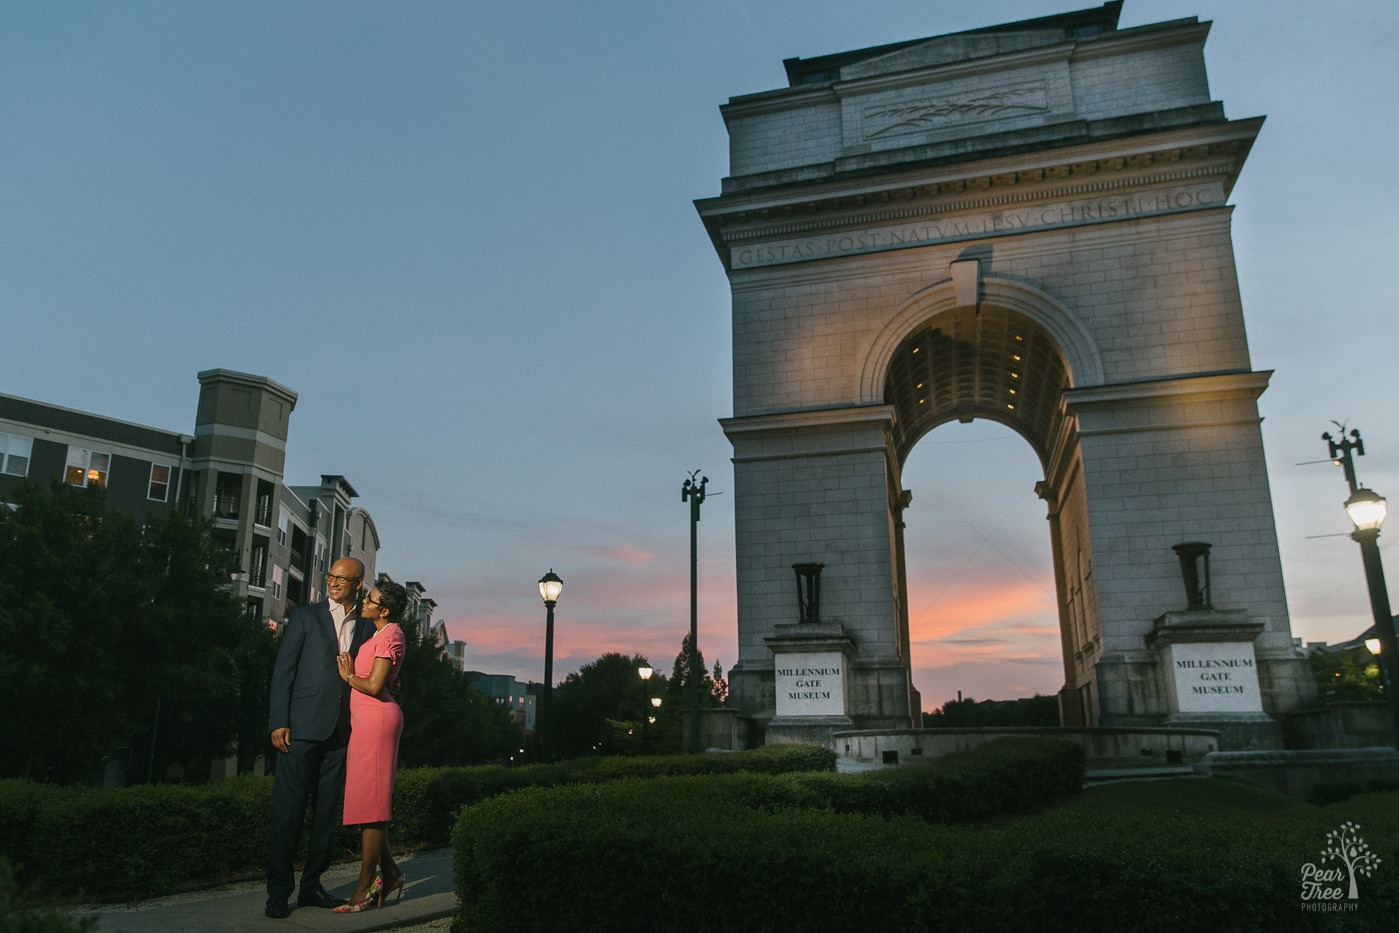 Engagement session with a couple standing in front of Millenium Gate in midtown Atlanta at sunset.